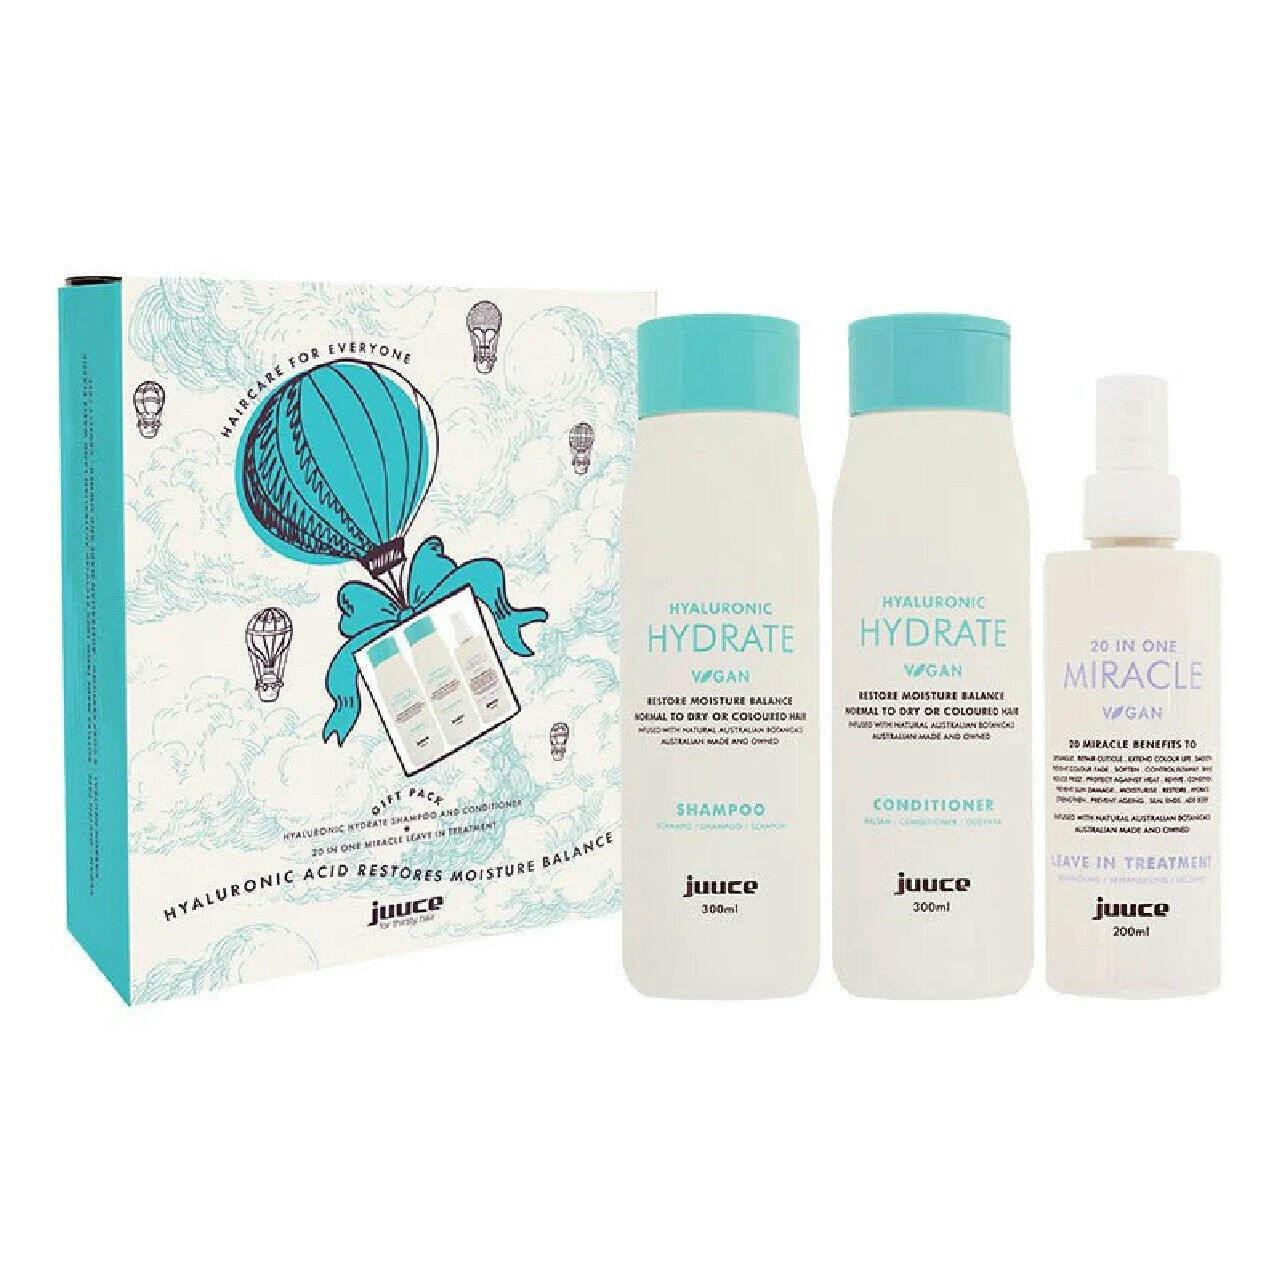 Juuce Hyaluronic Hydrate Trio